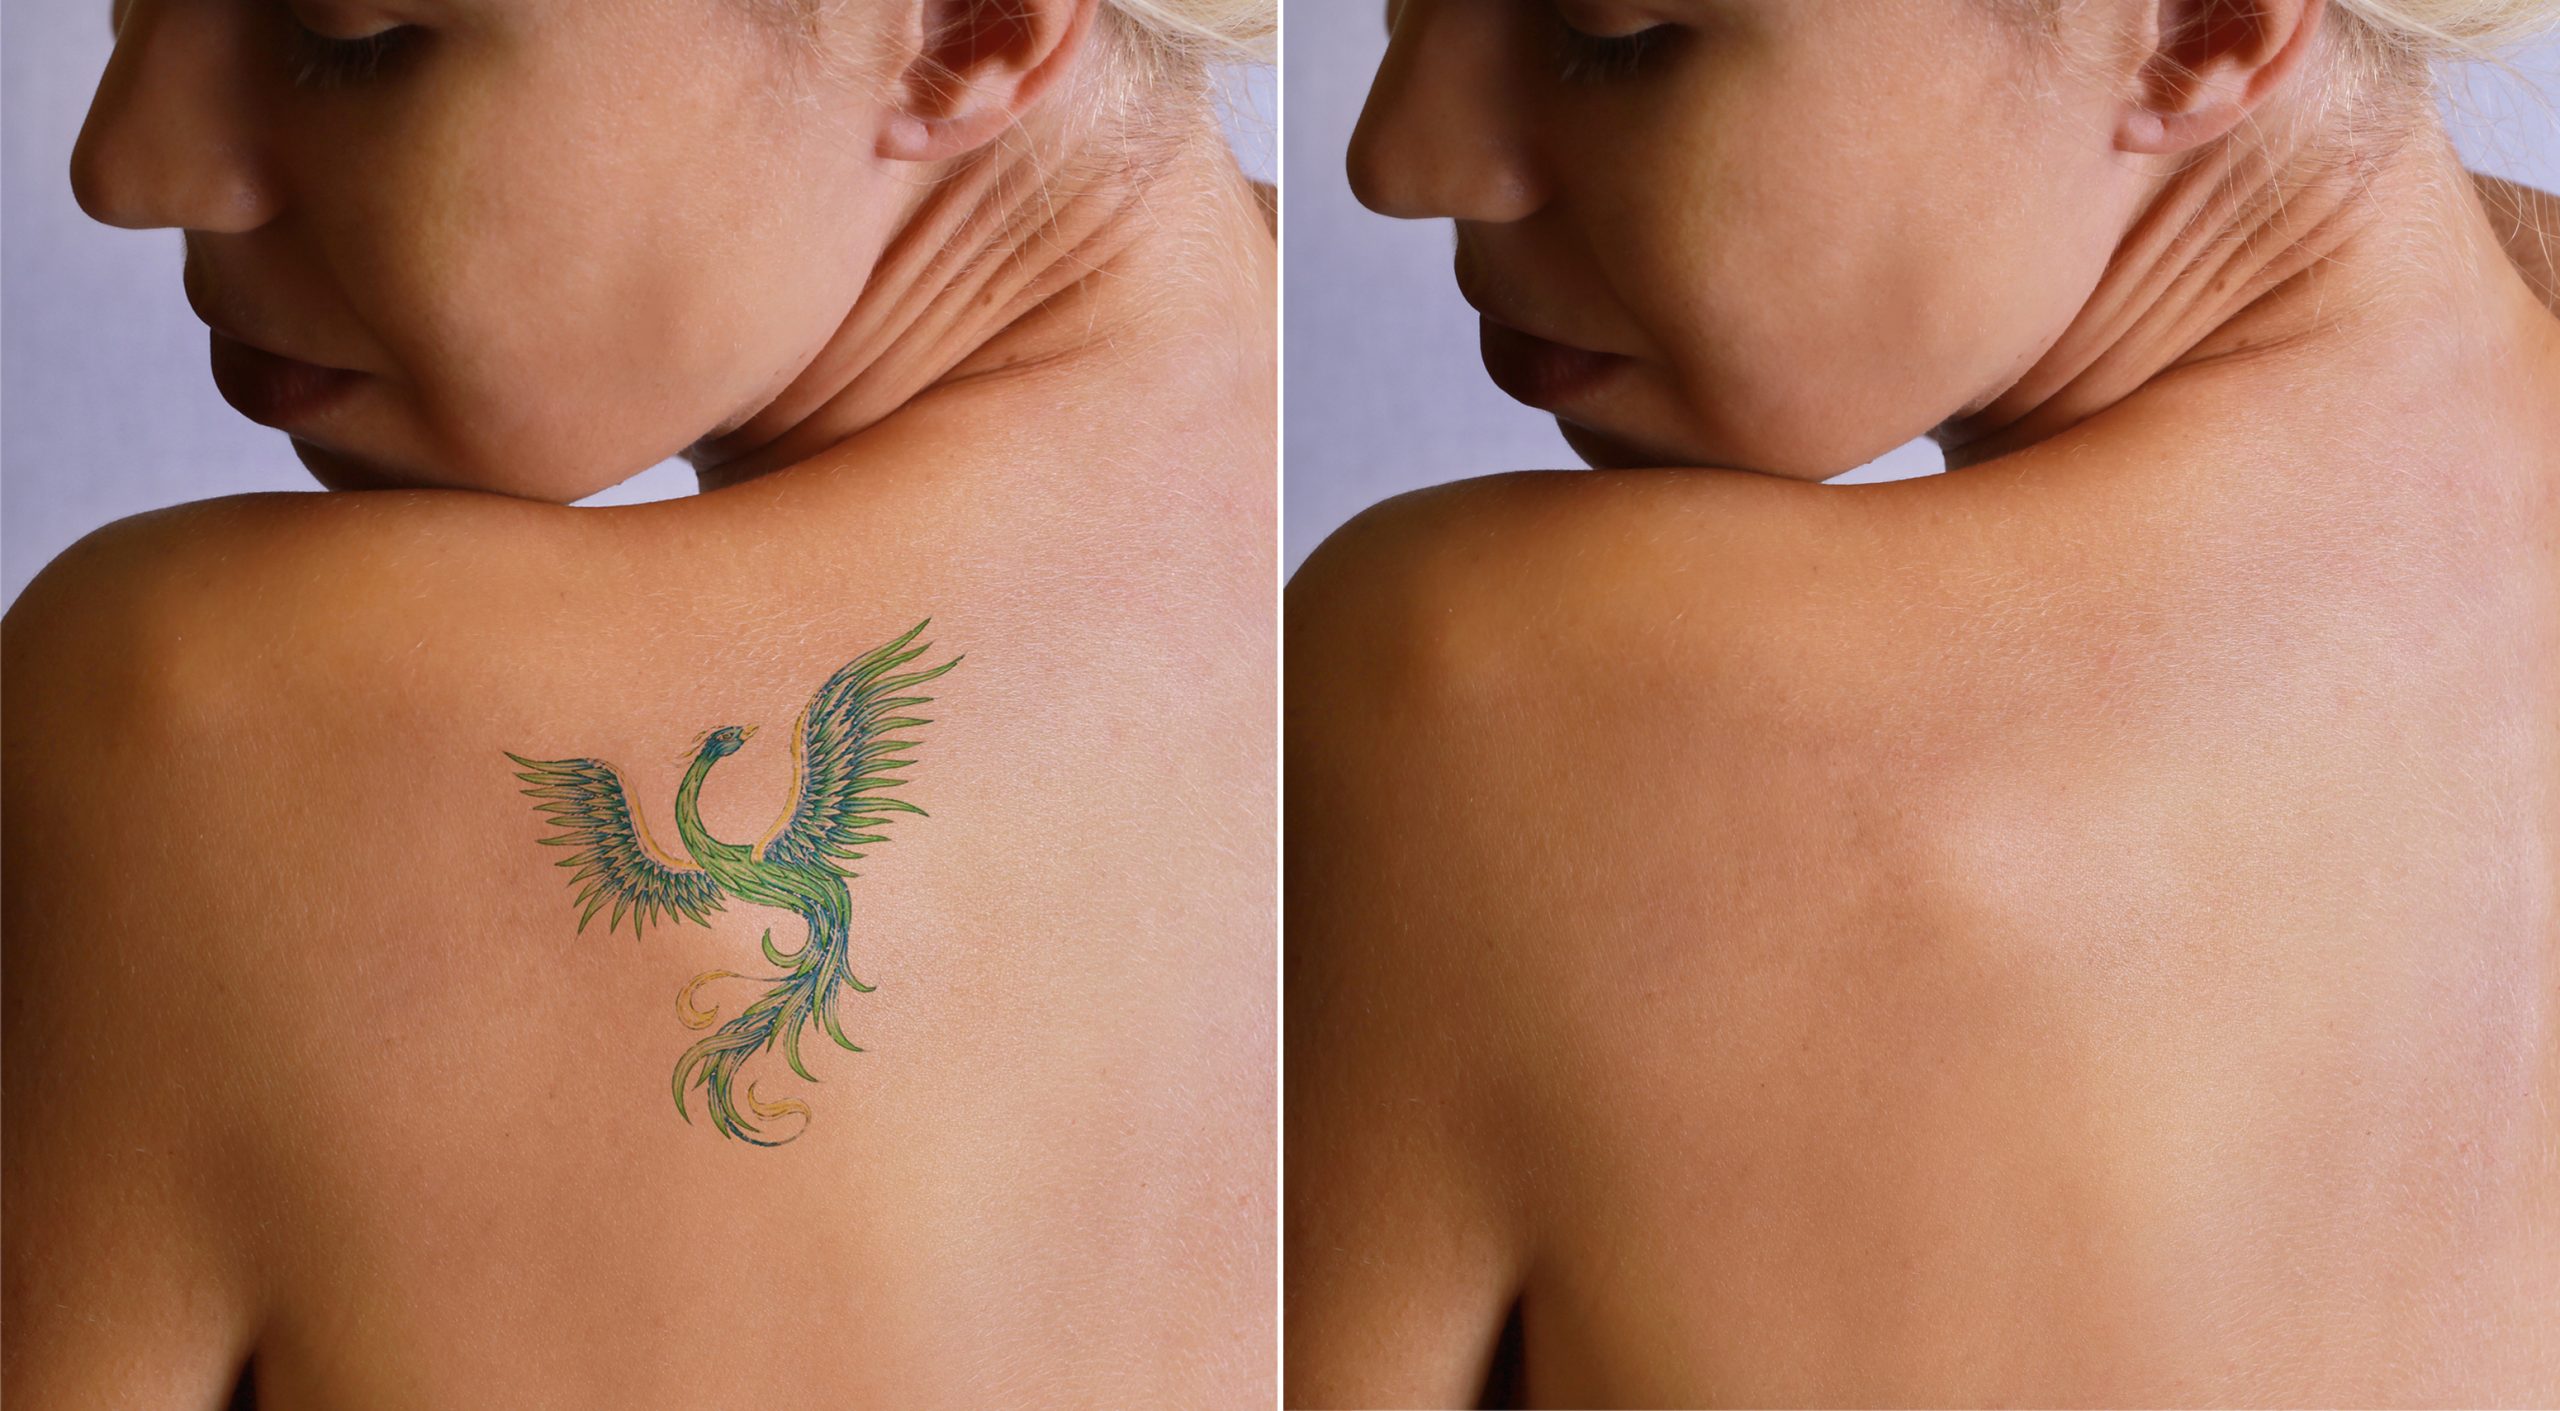 5 Signs That Tell You That it's Time to Get a Tattoo Removed